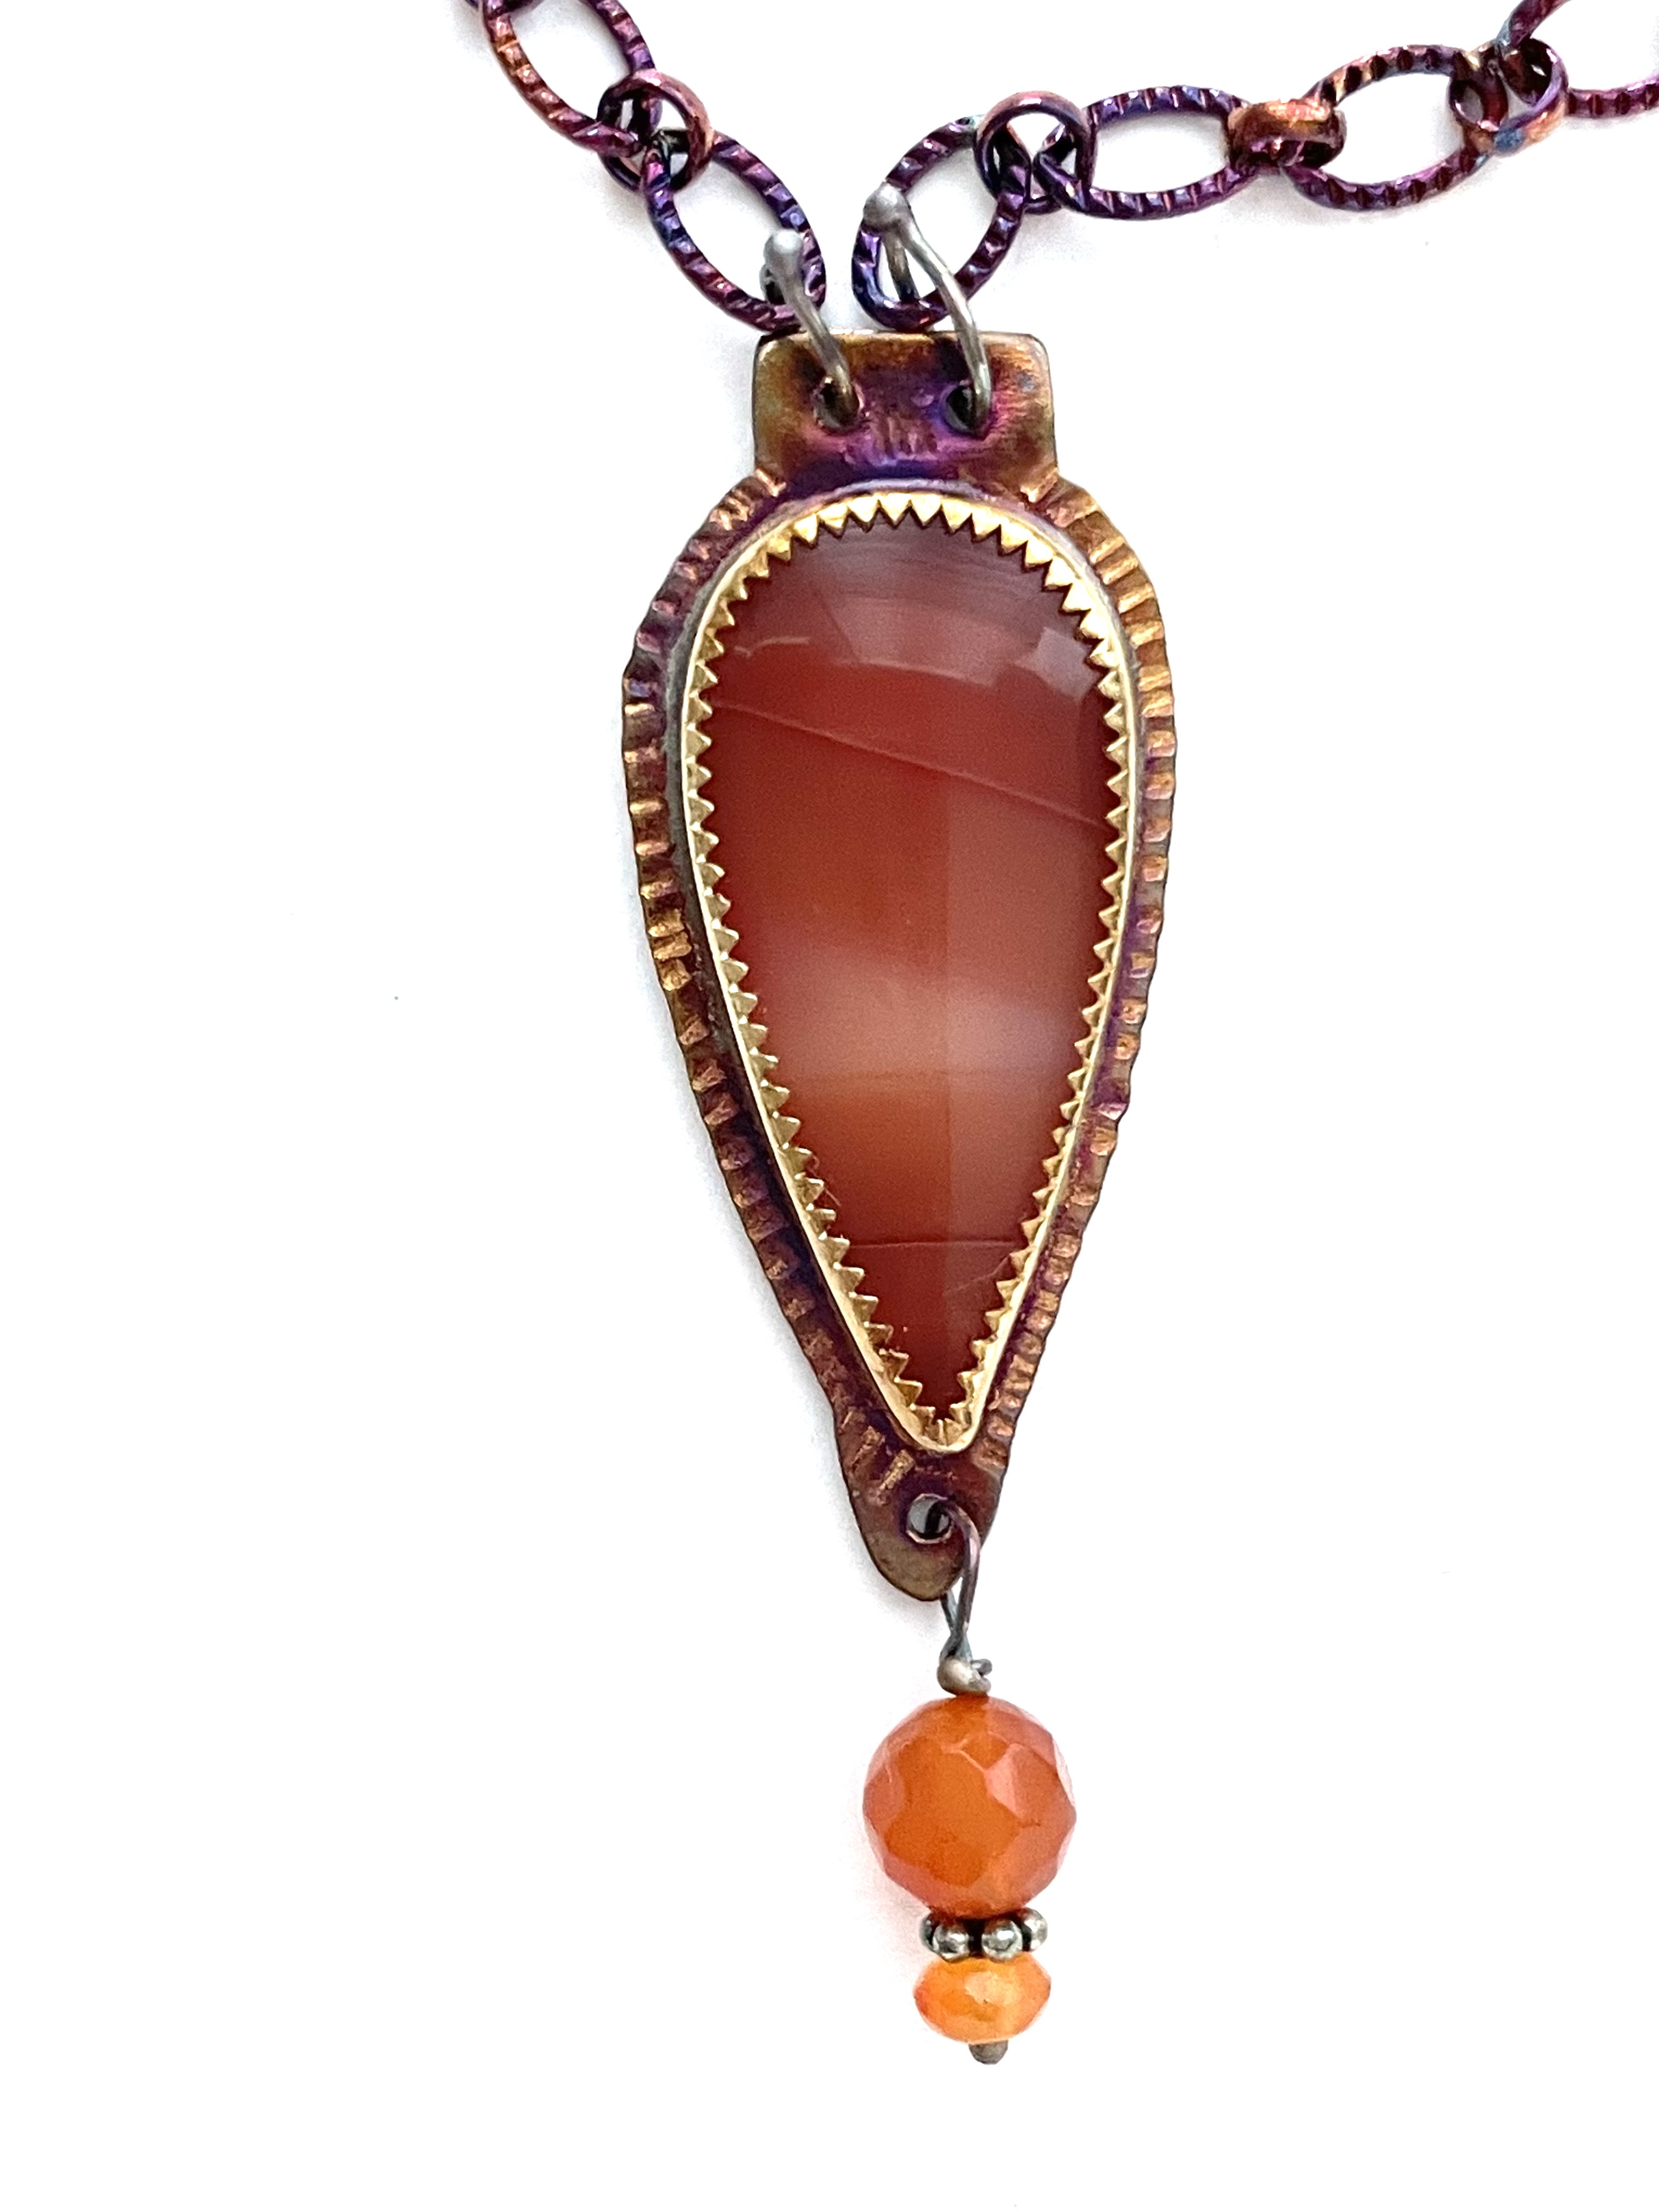 Sterling silver, Banded Carnelian Agate from Indonesia, 18